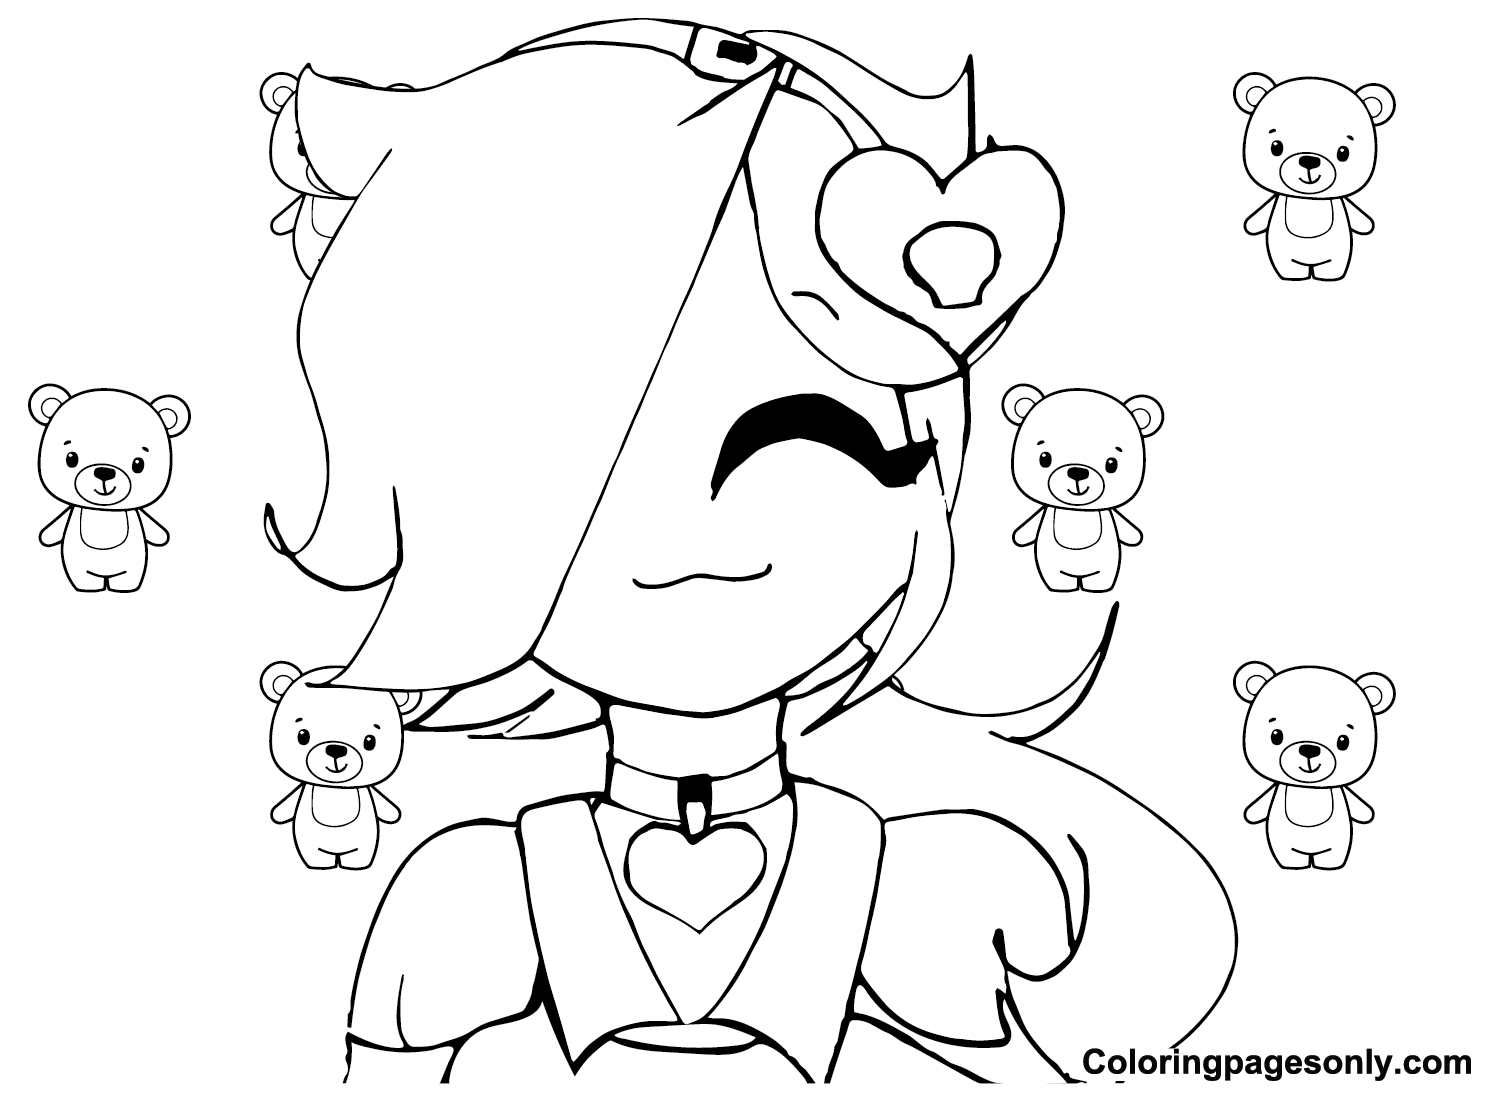 Lovely Colette Brawl Stars Coloring Page